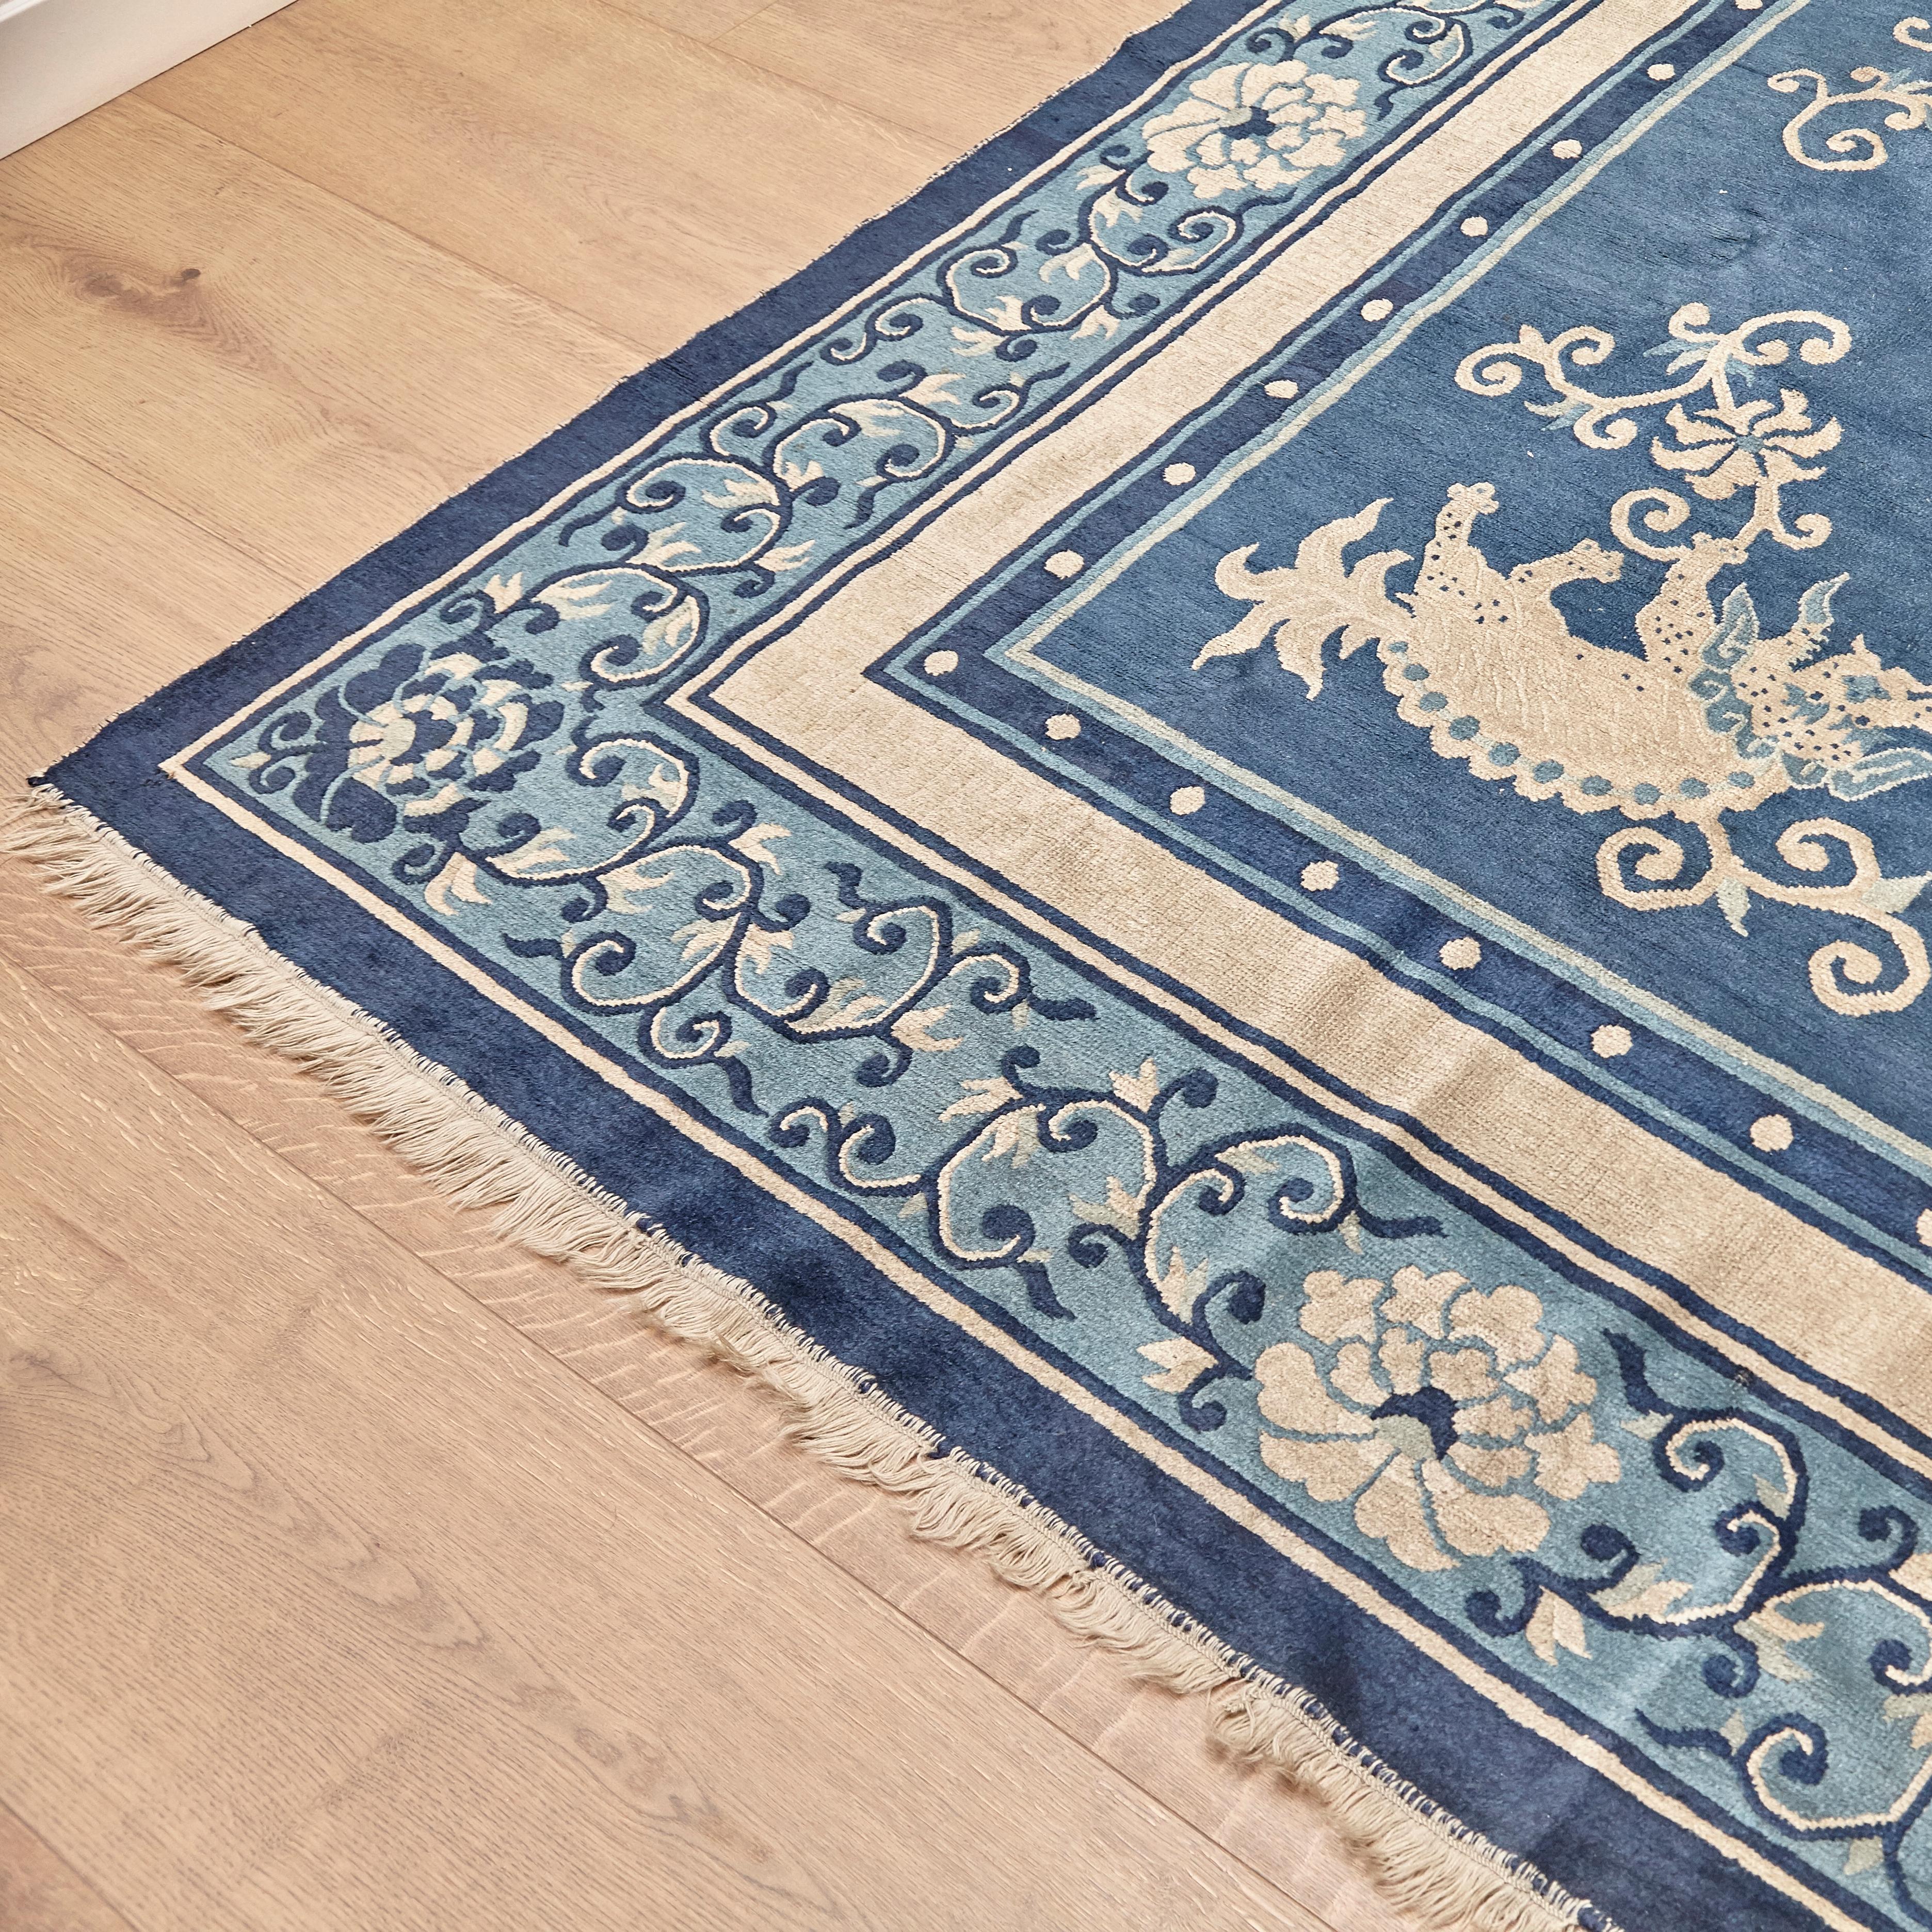 Antique Ningshia from China made in circa 1920

In original condition and some wear consistent of age and use.

This rug is been restored as we show on the photos.

Hand knotted wool

Measures: 382 x 526 cm.